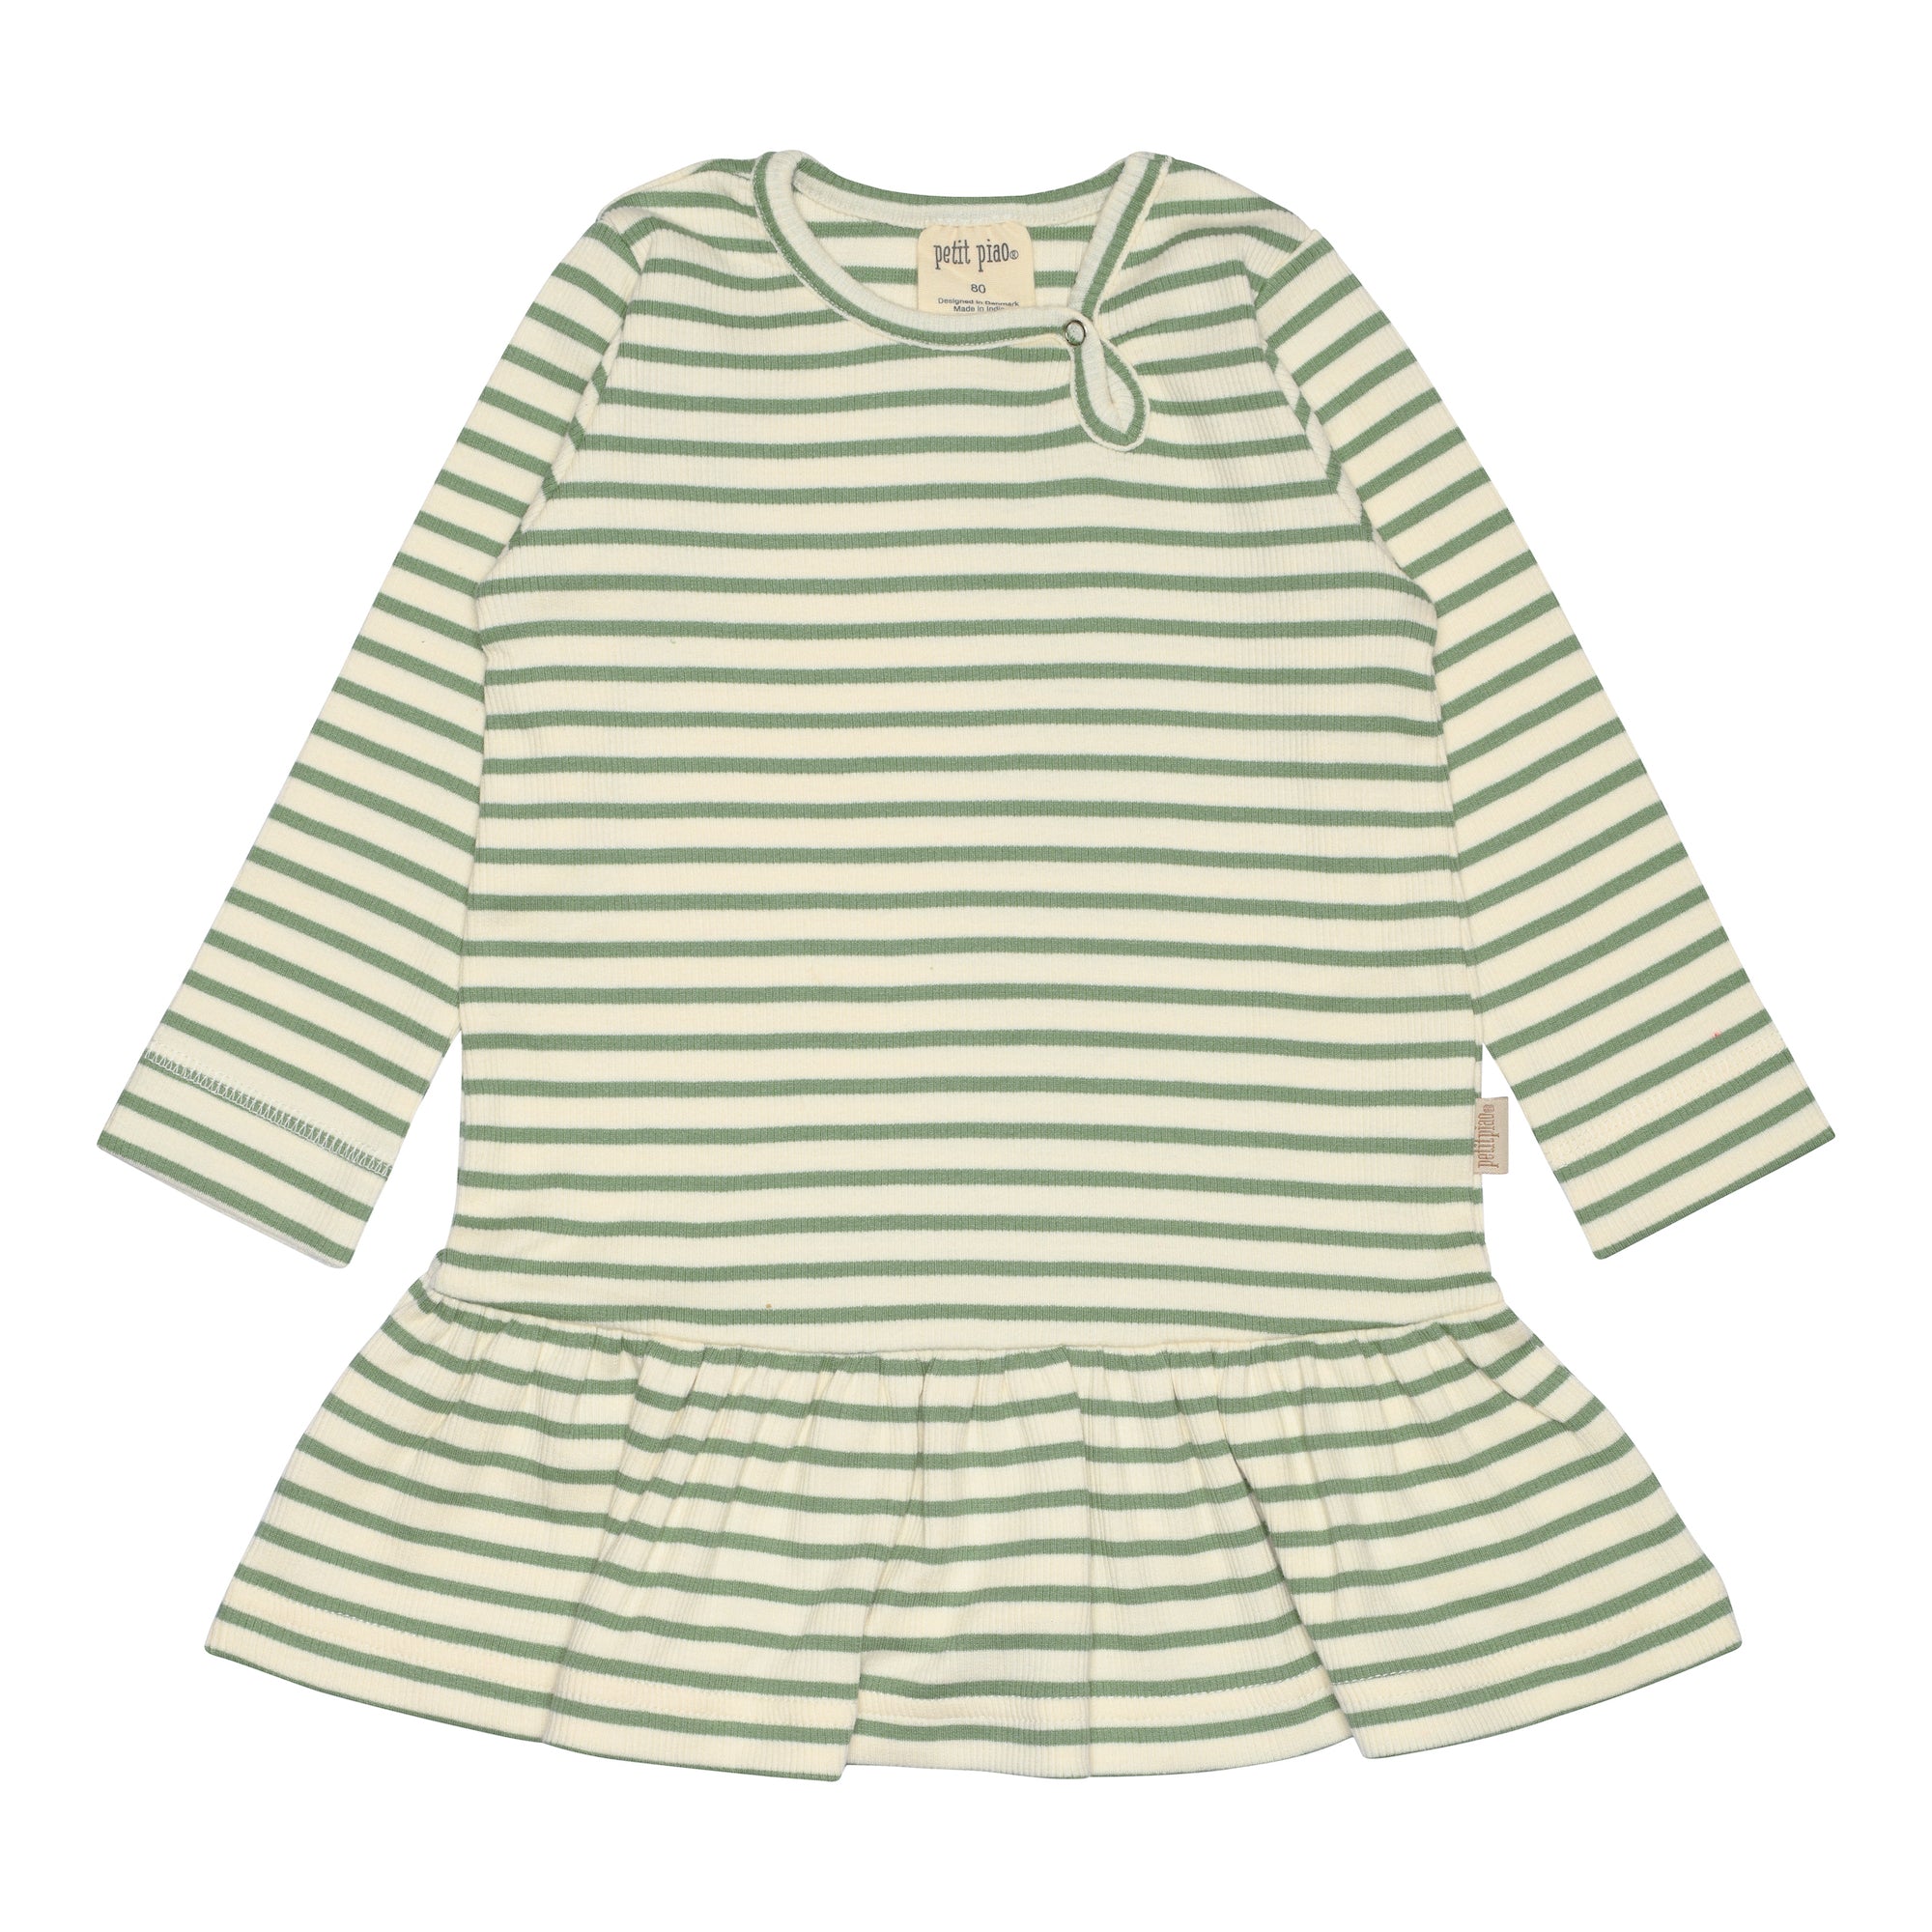 Petit Piao - Dress LS Modal Striped, PP306 - Spring Green / Offwhite